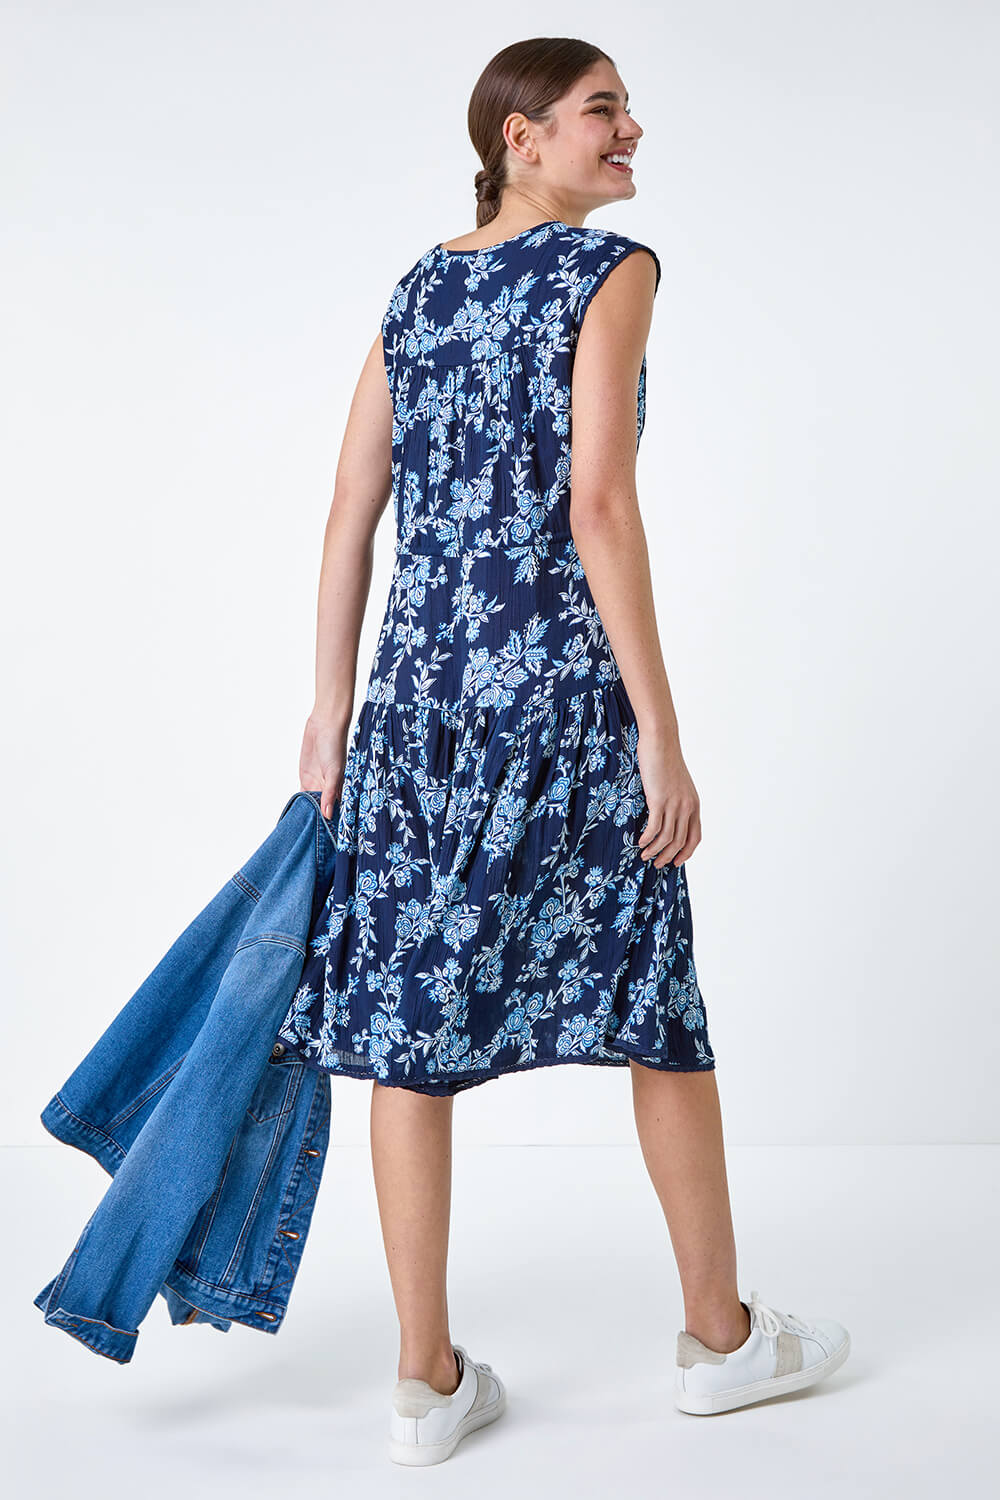 Navy  Floral Print Tiered Woven Dress, Image 3 of 5